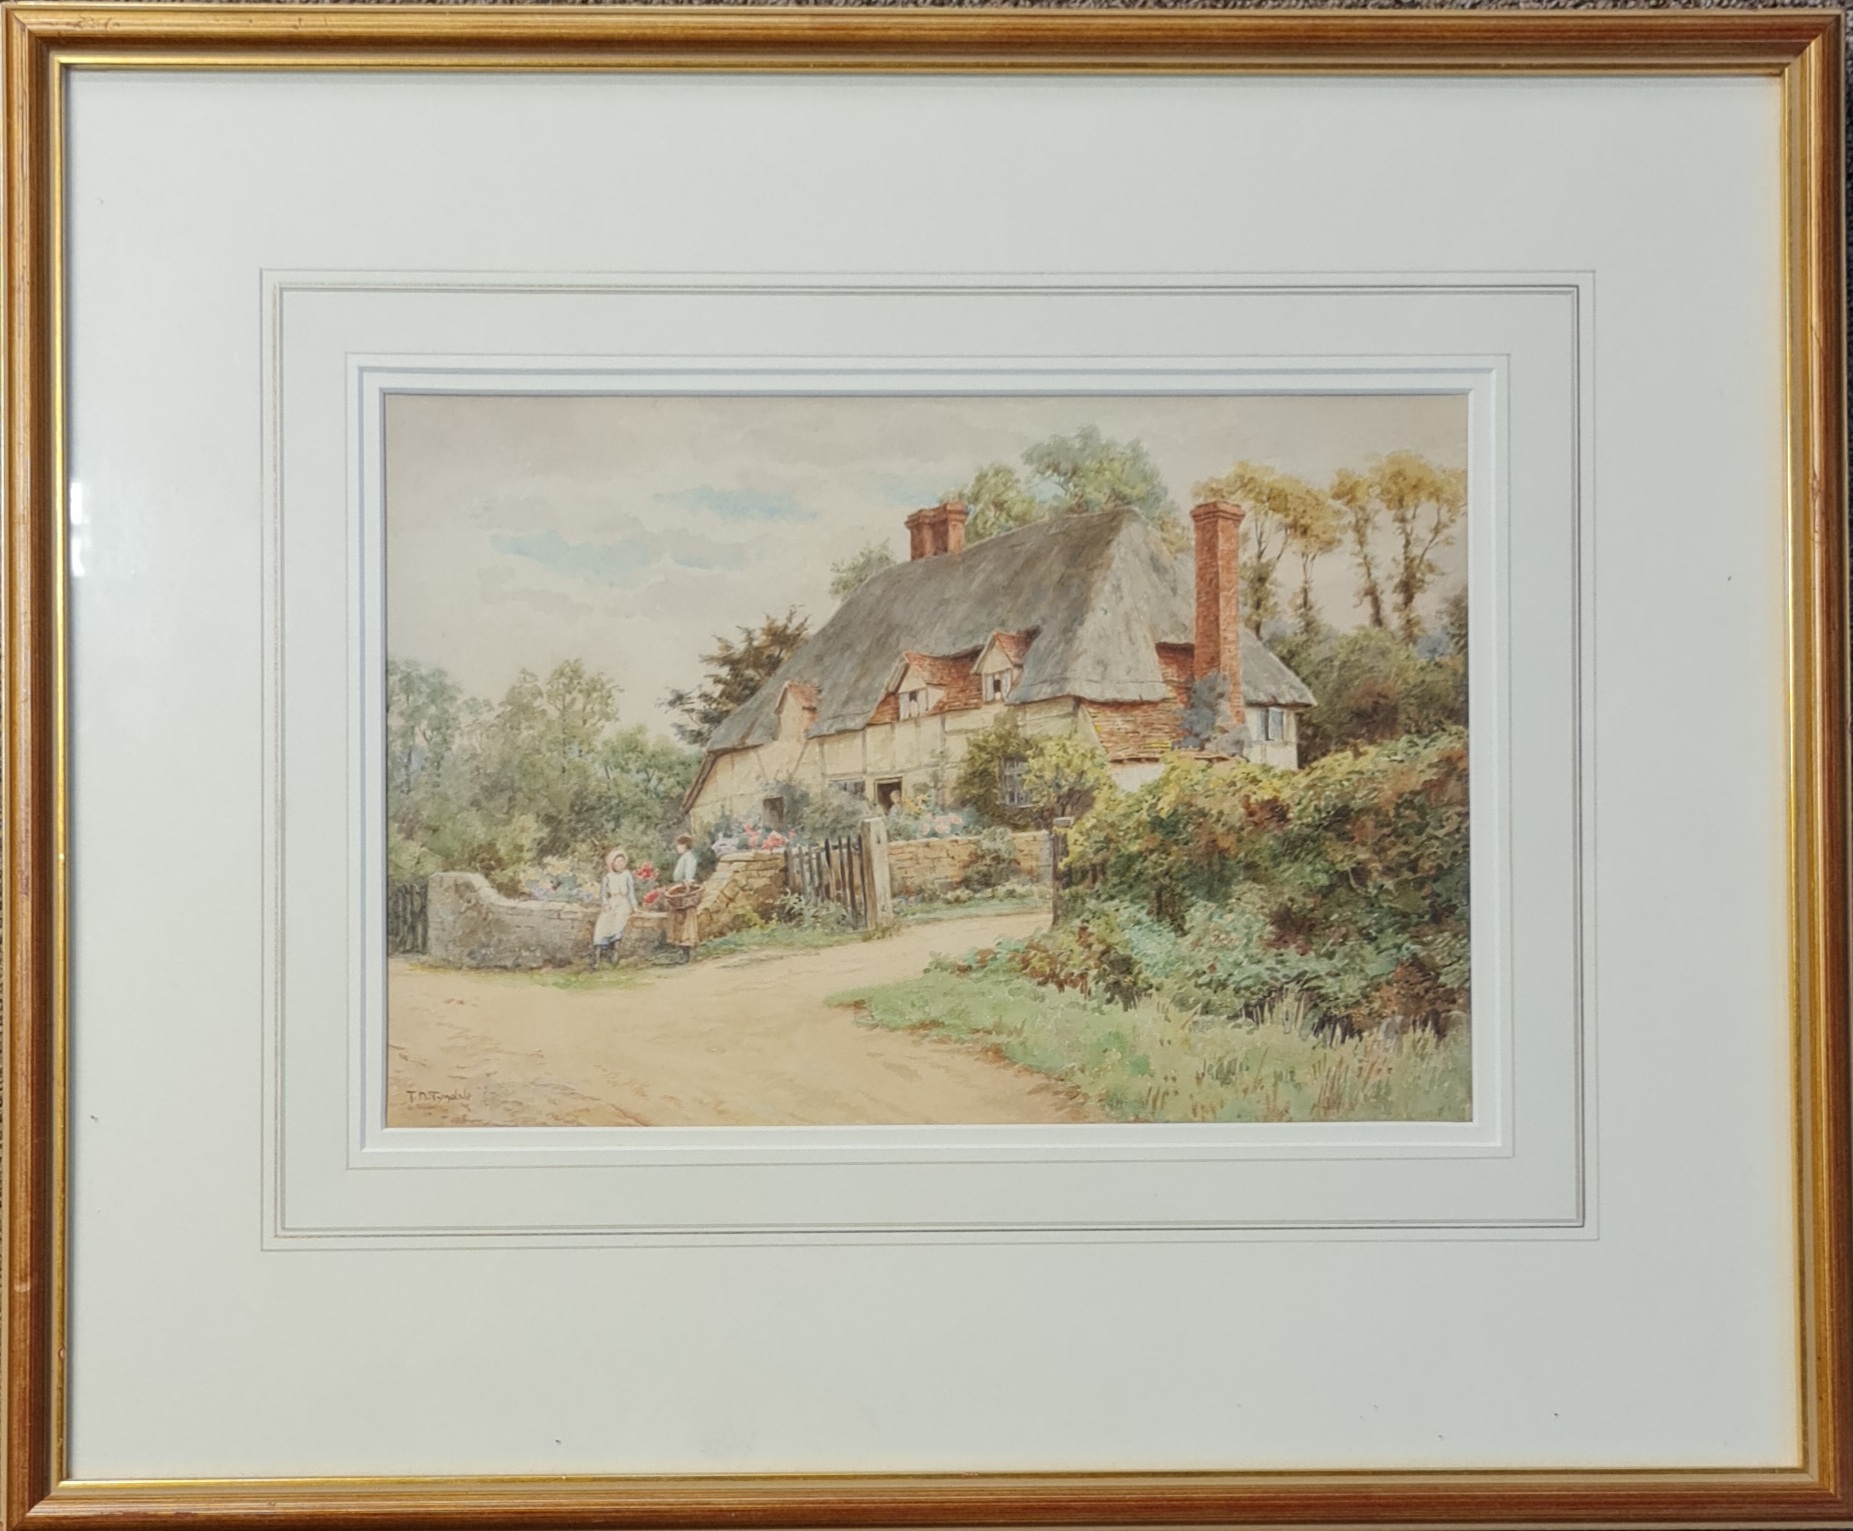 T. N. TYNDALE. Framed, signed, watercolour on paper, rural house with figures, 22cm x 33cm.